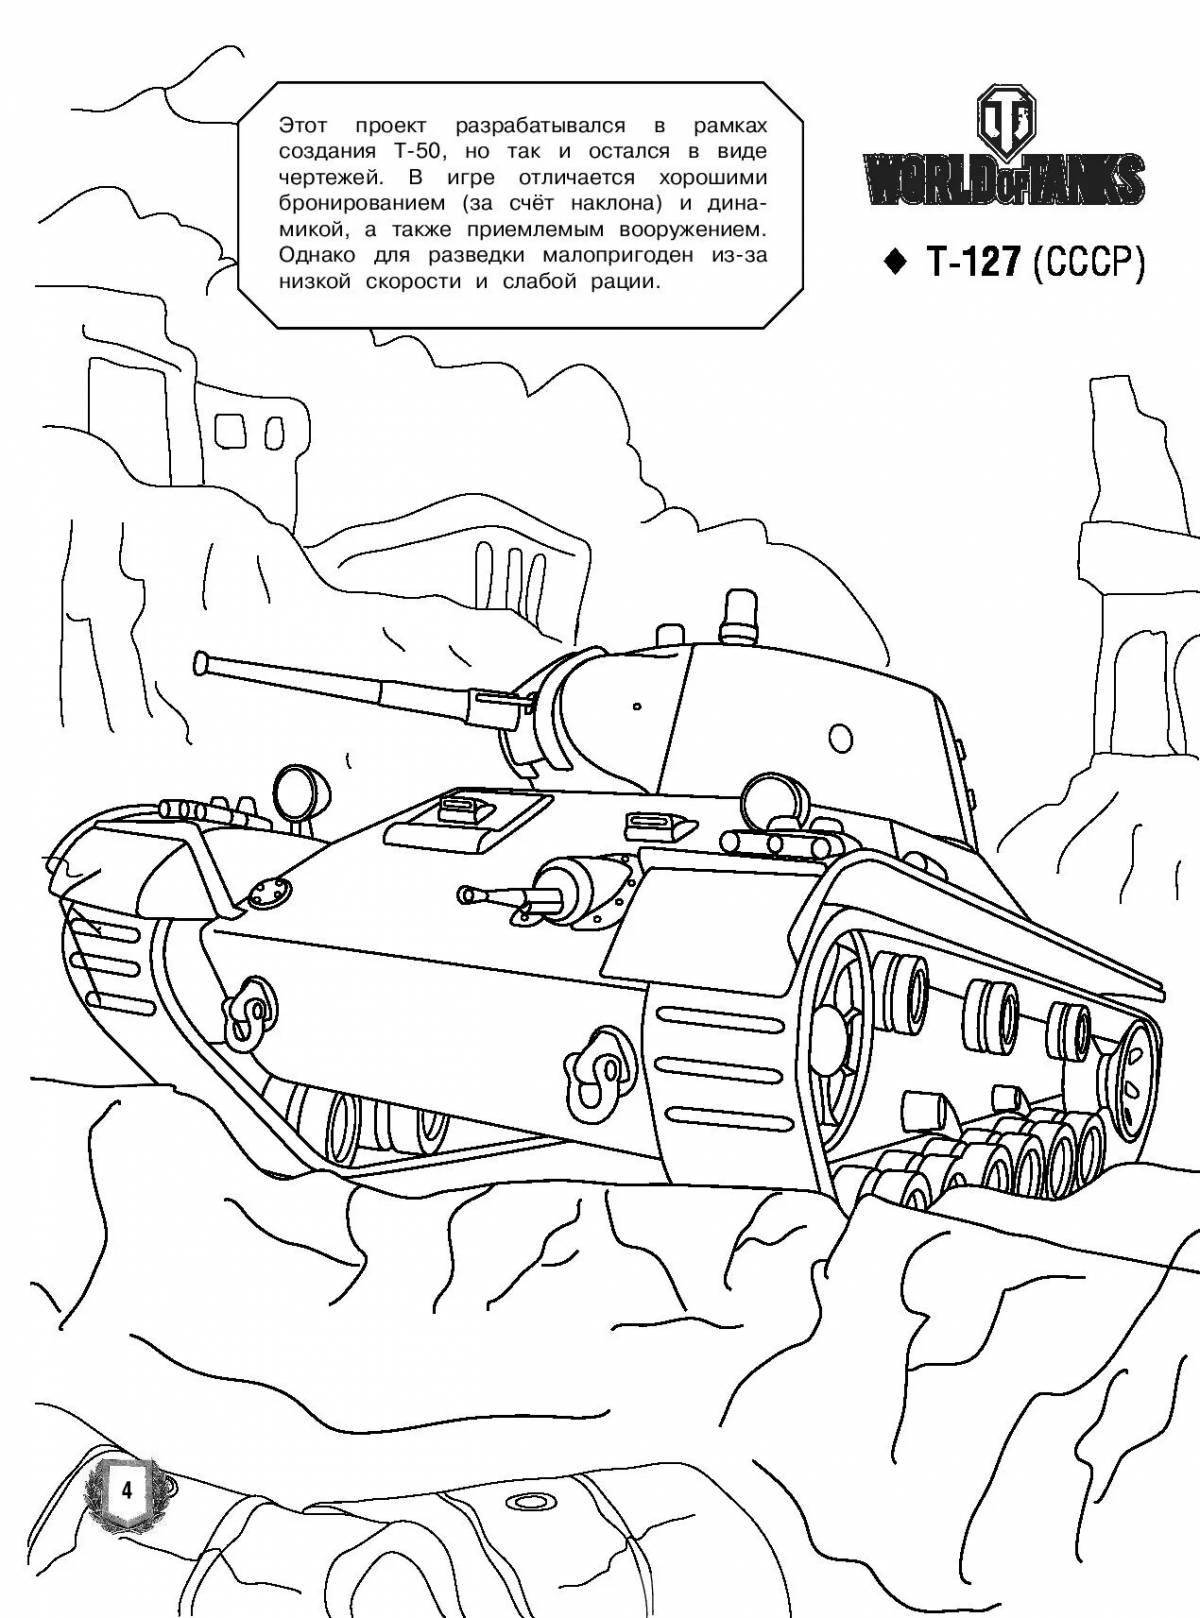 Awesome world of tank blitz coloring book